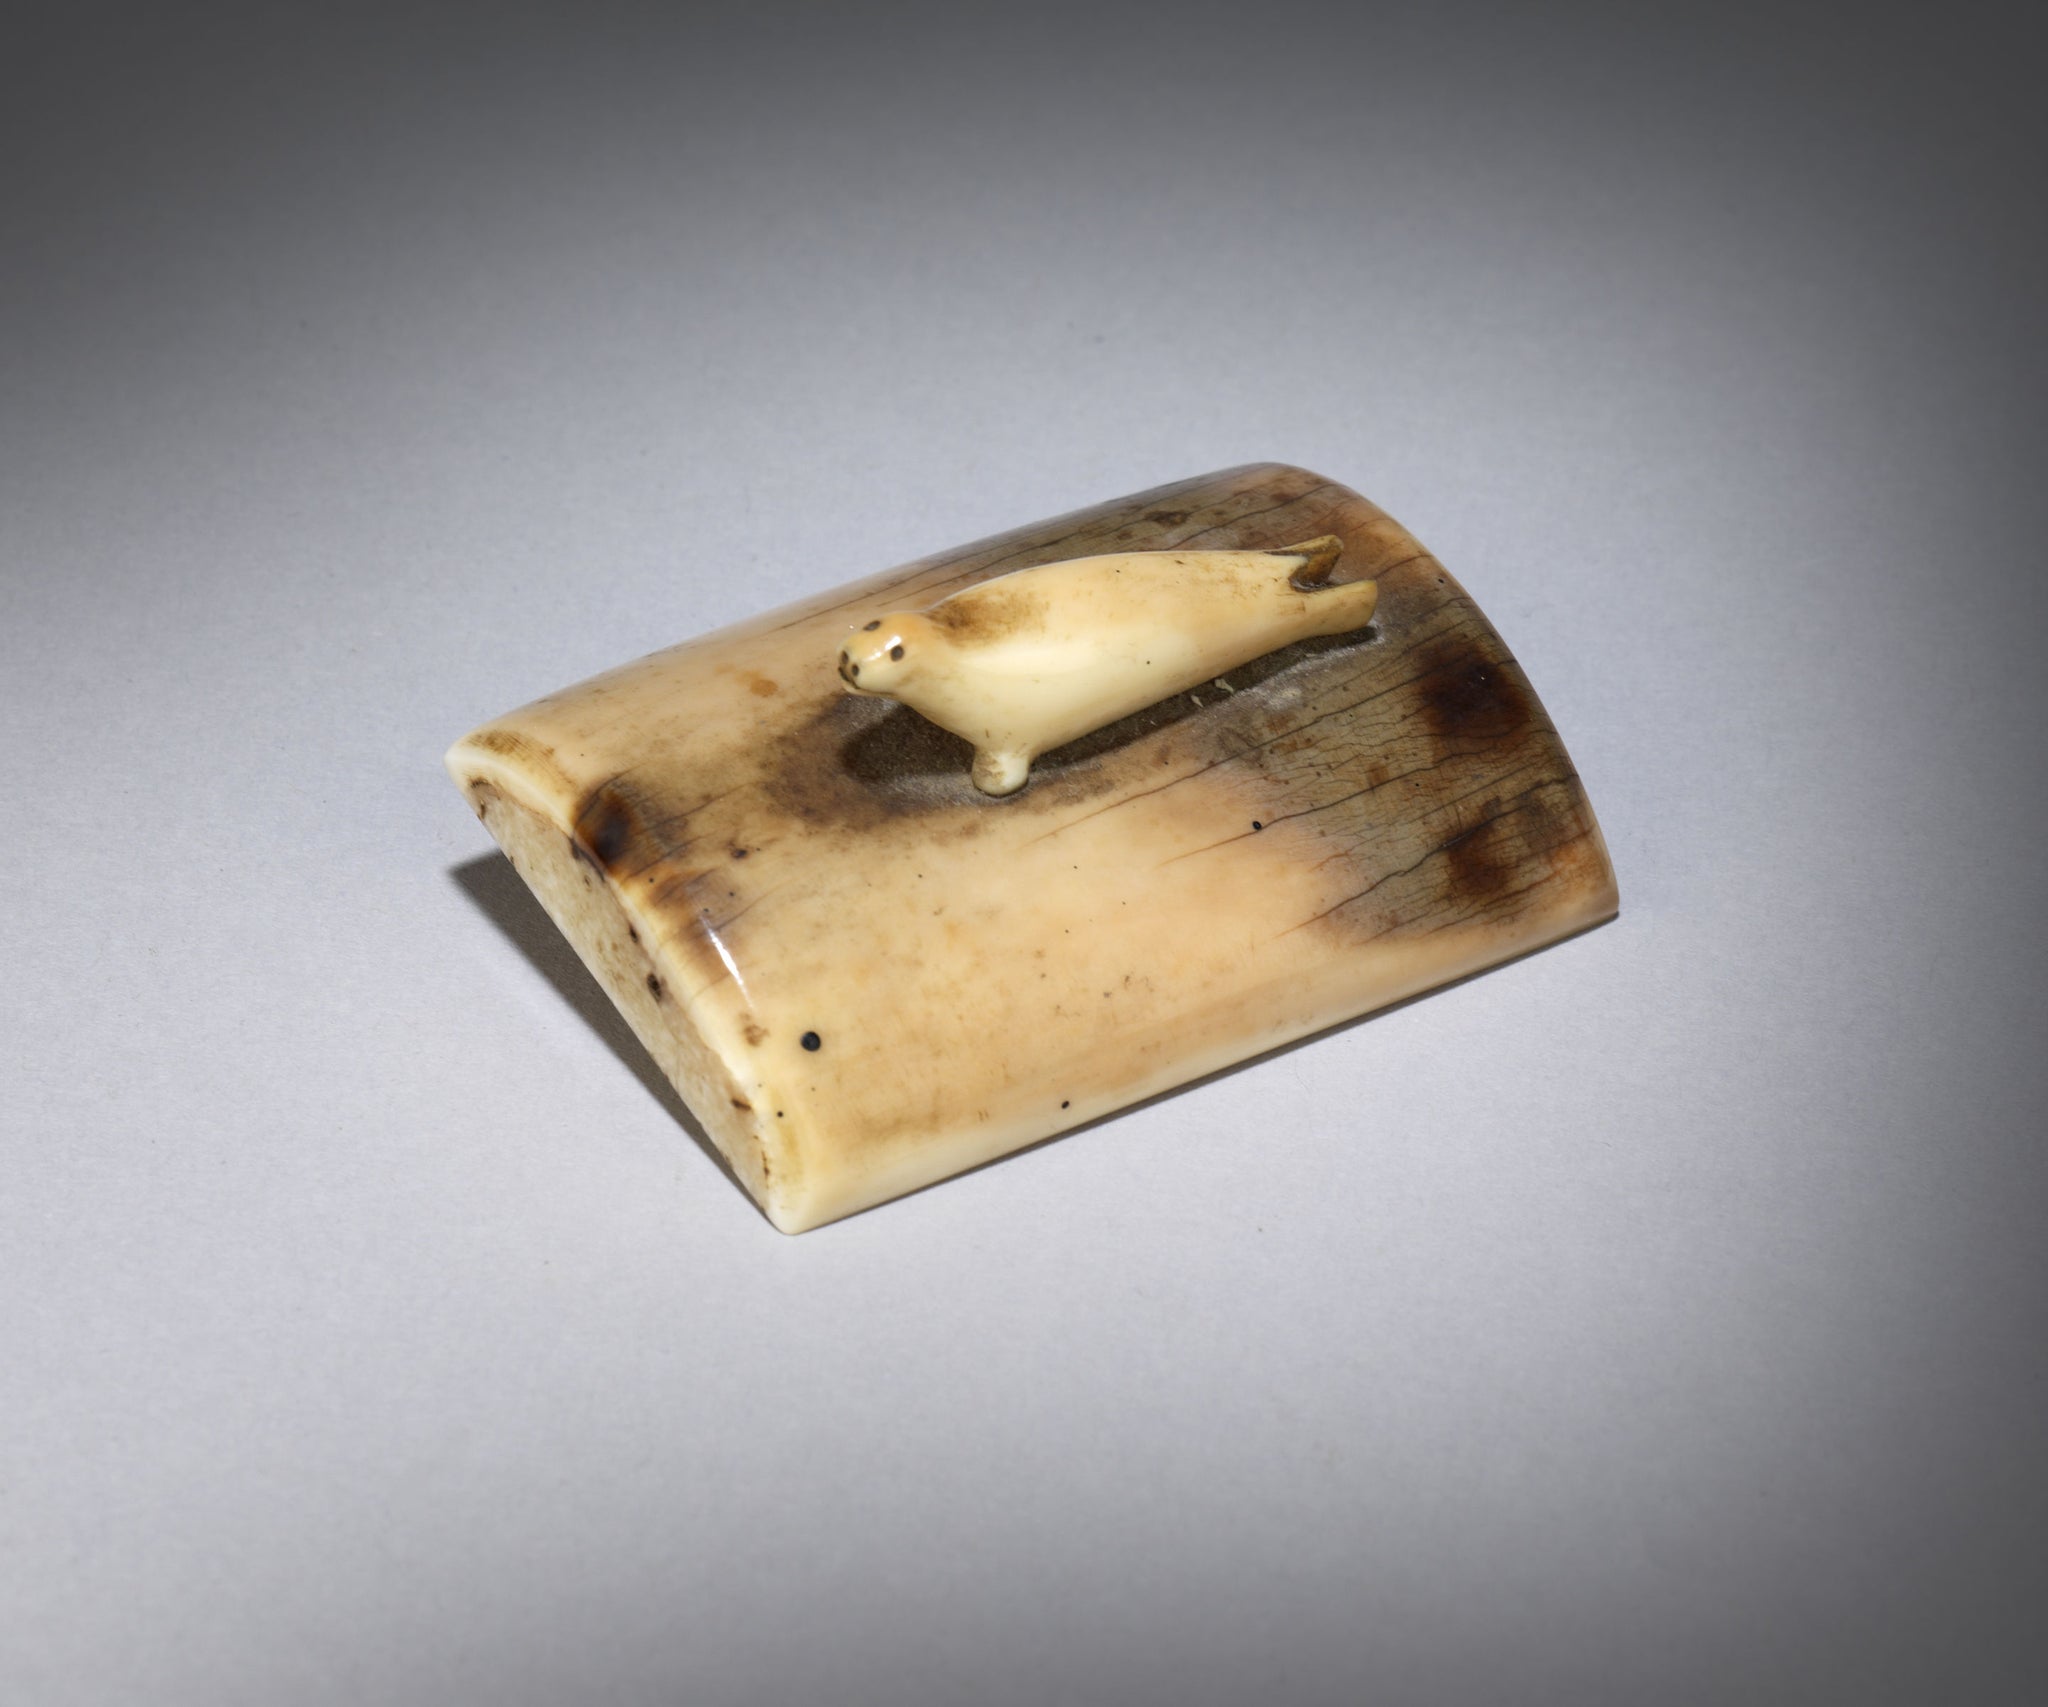 Rare Inuit Miniature Carving of a Seal Pup